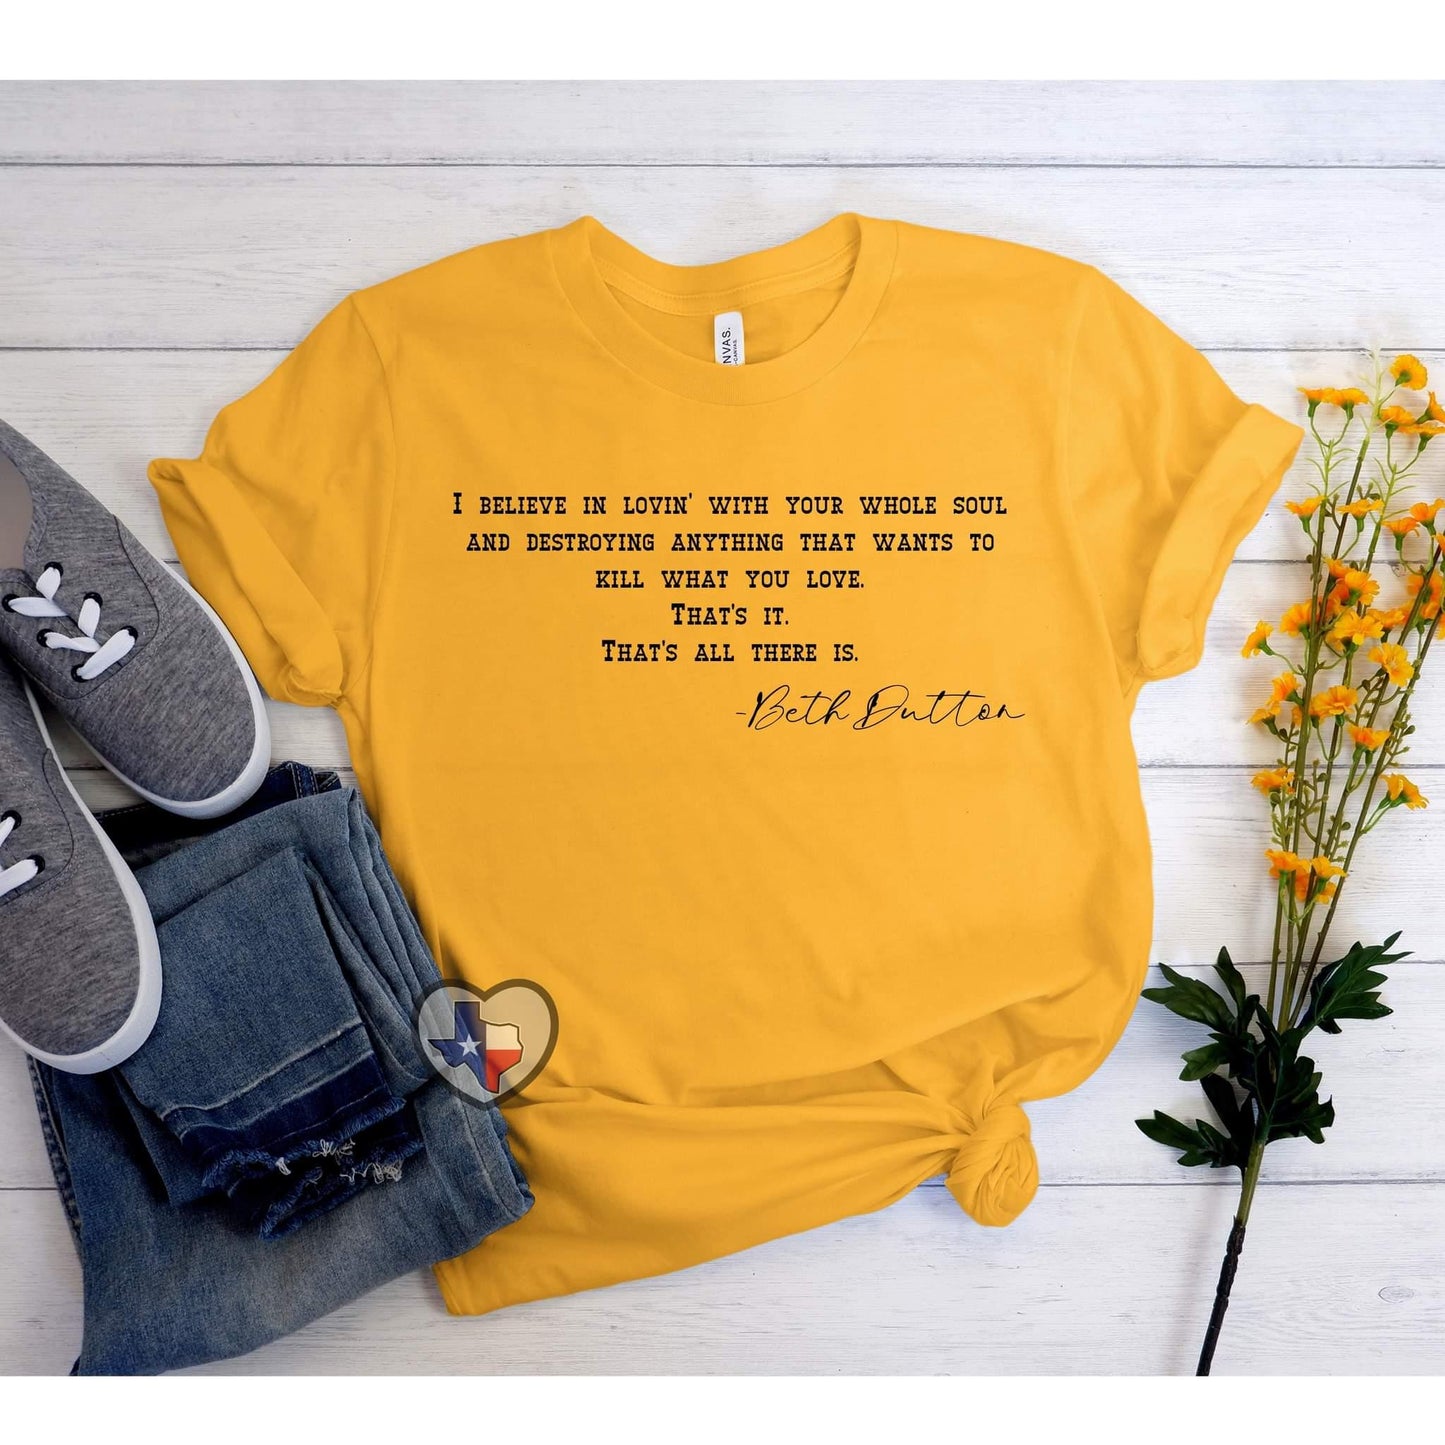 I Believe in Lovin' With Your Whole Soul *EXCLUSIVE* - Texas Transfers and Designs